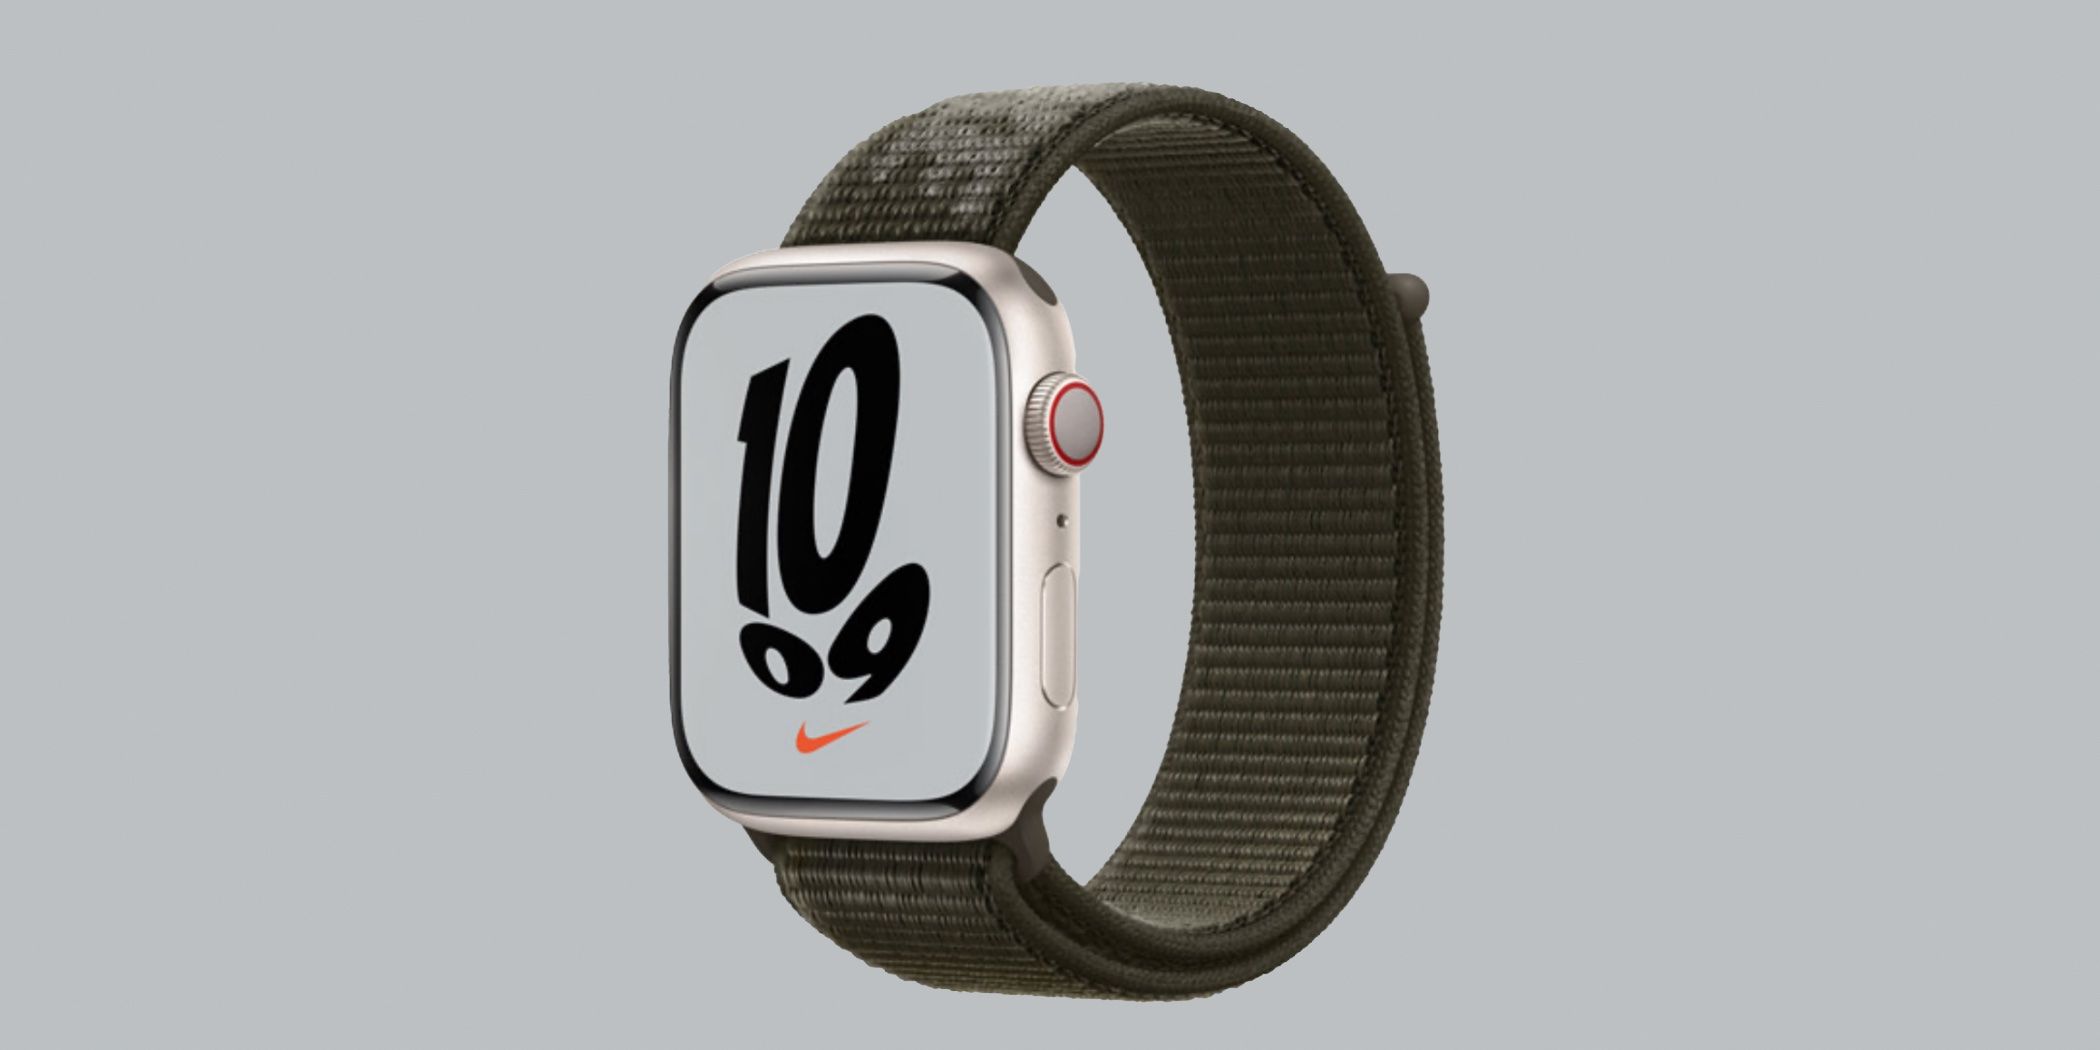 Apple Brings Nike Watch Faces To Every Apple Watch Model